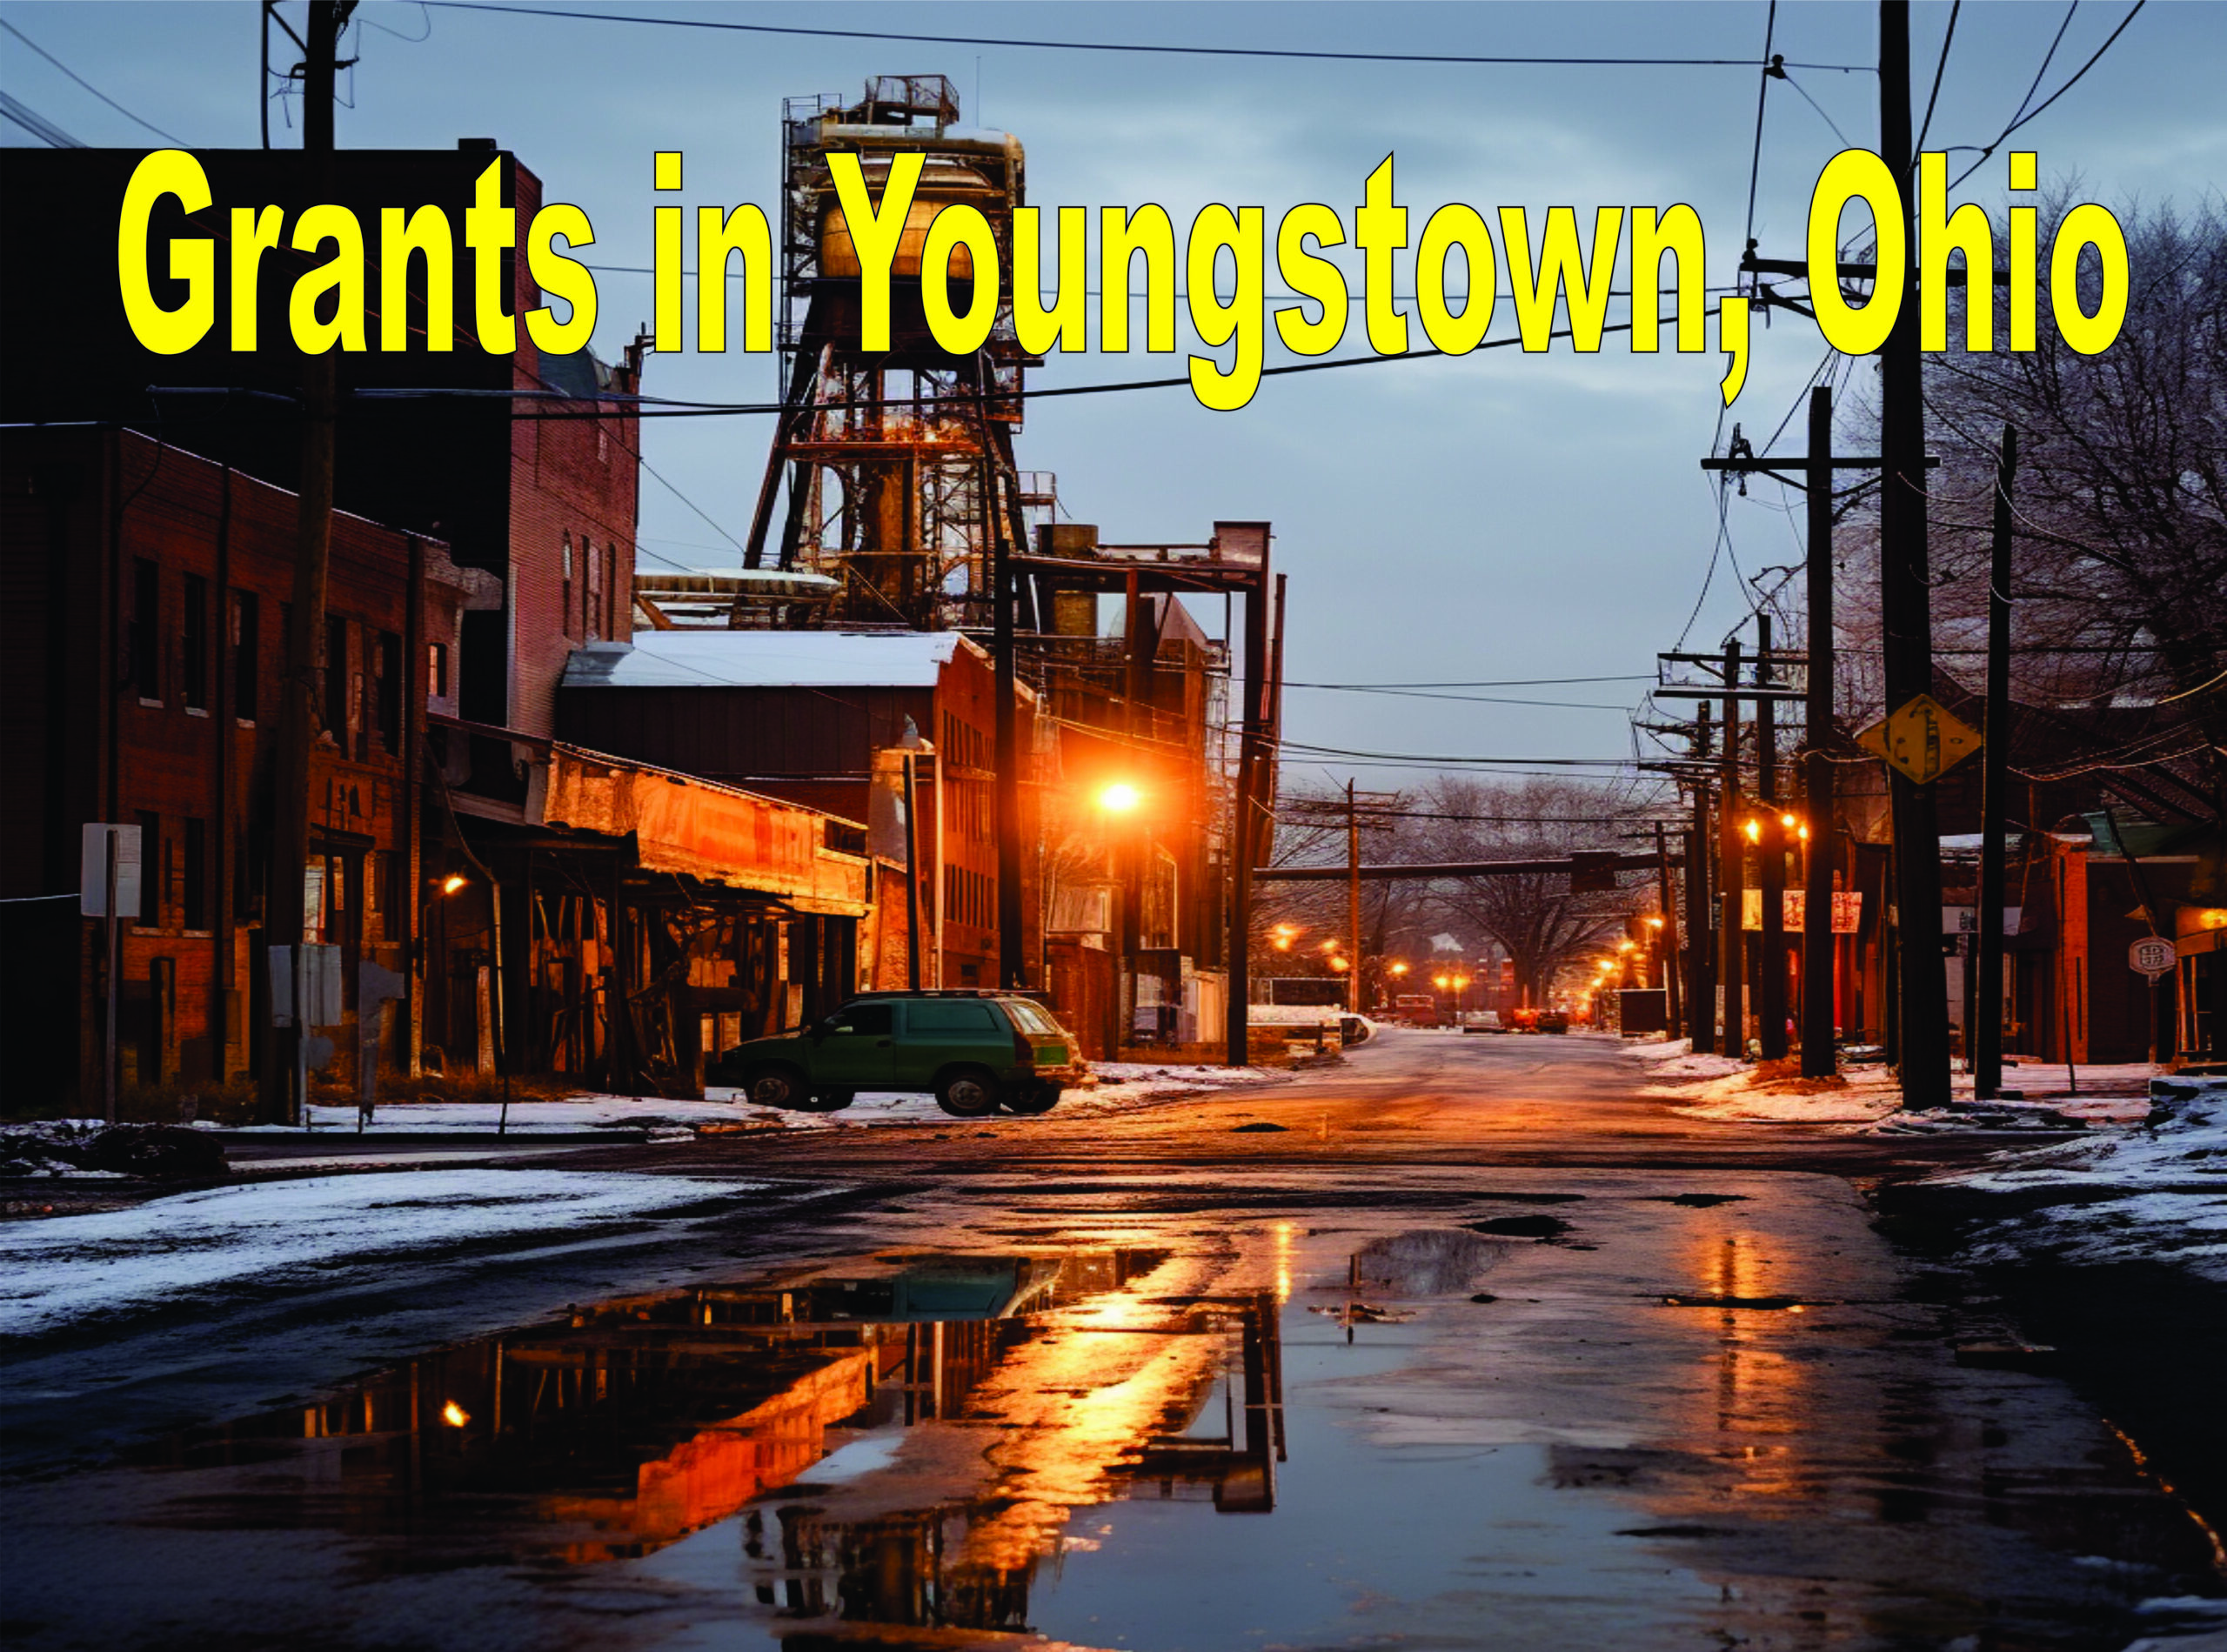 Grants In Youngstown, Ohio